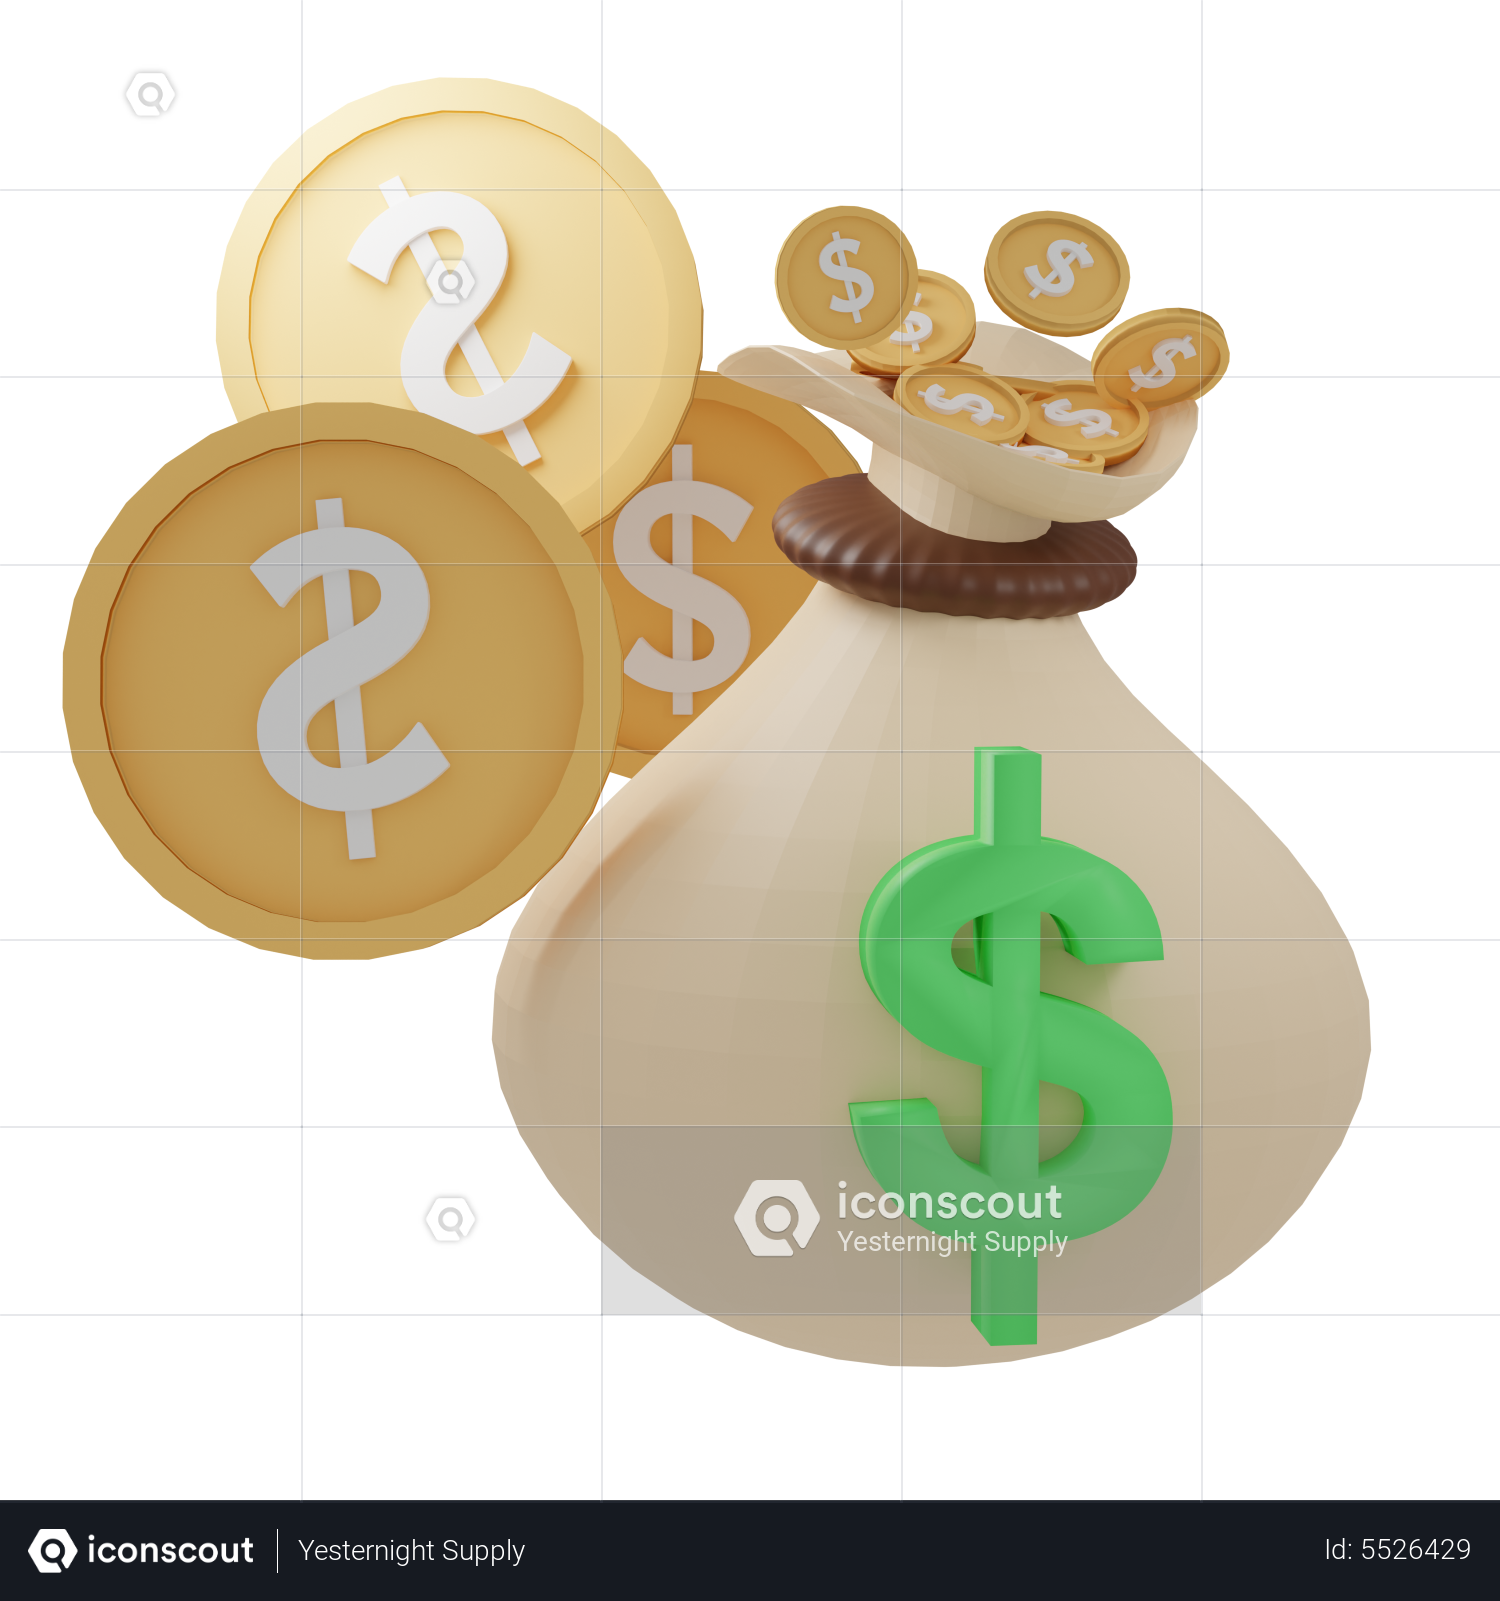 Sack With Money Bag With Gold Coins Of Dollars Icon Of Moneybag Symbol Of  Cash For Pay Million Of Euro Jackpot Bank Is Saving Treasure Concept Of  Deposit Savings And Prize Big